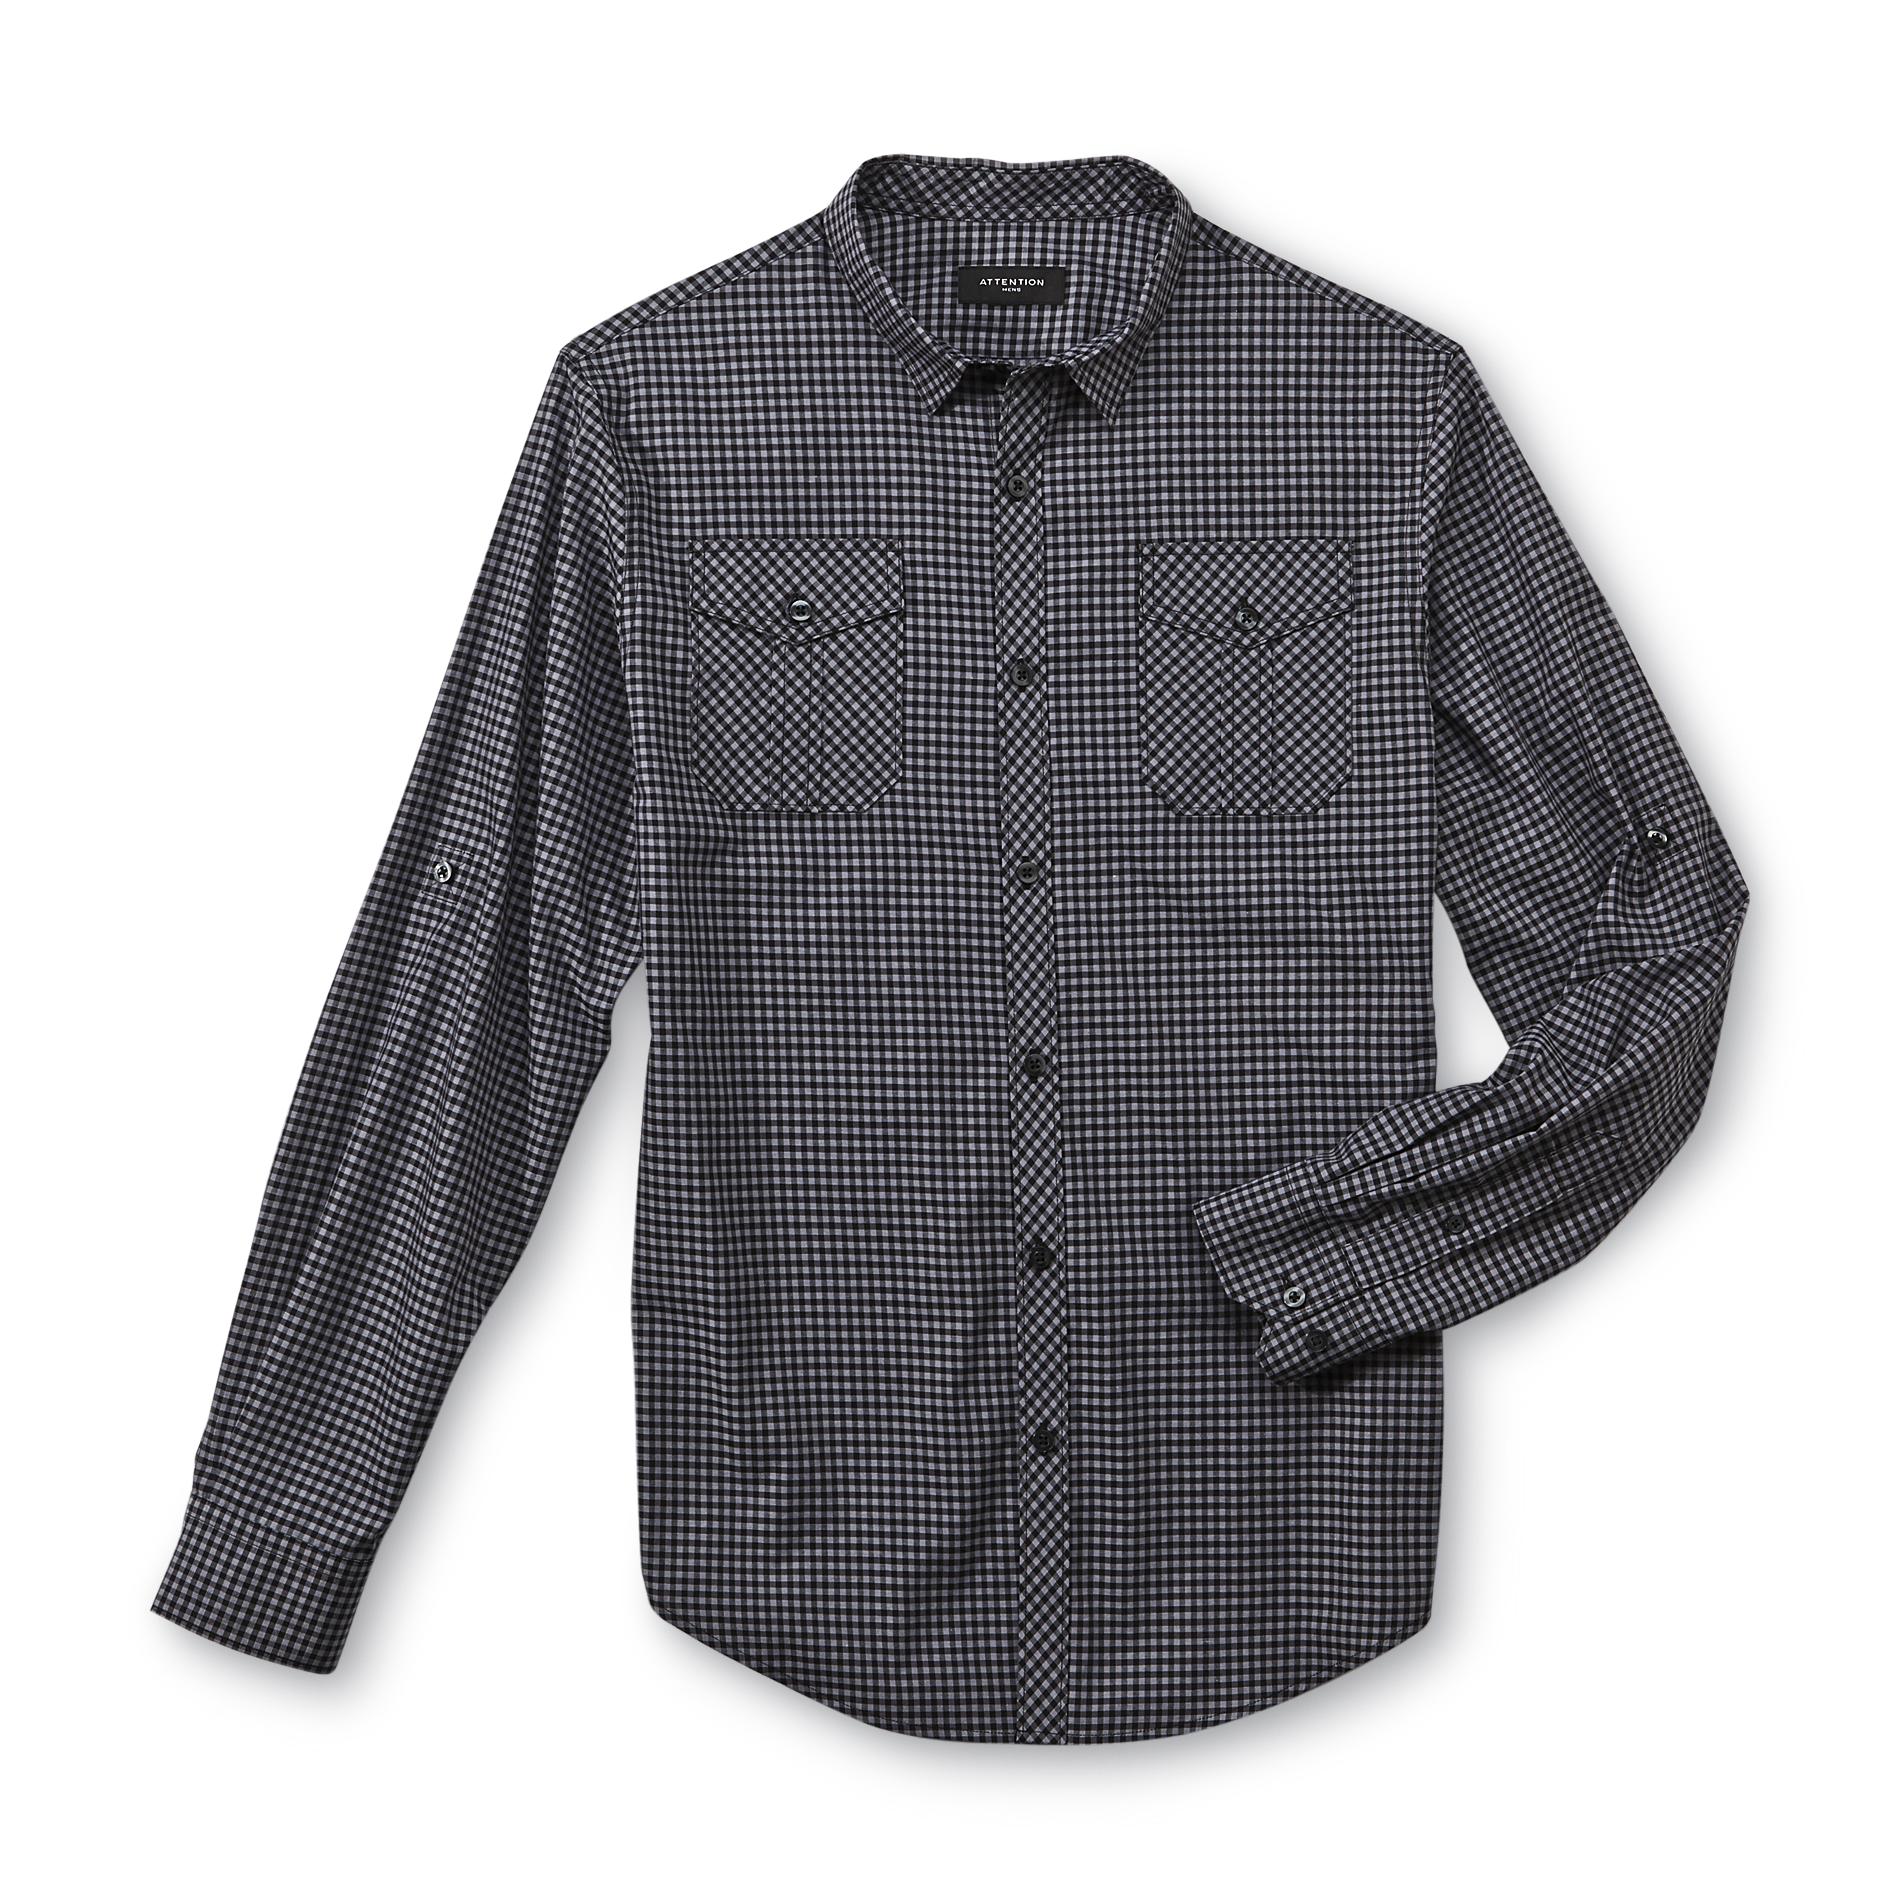 Attention Men's Tab-Sleeve Shirt - Gingham Check